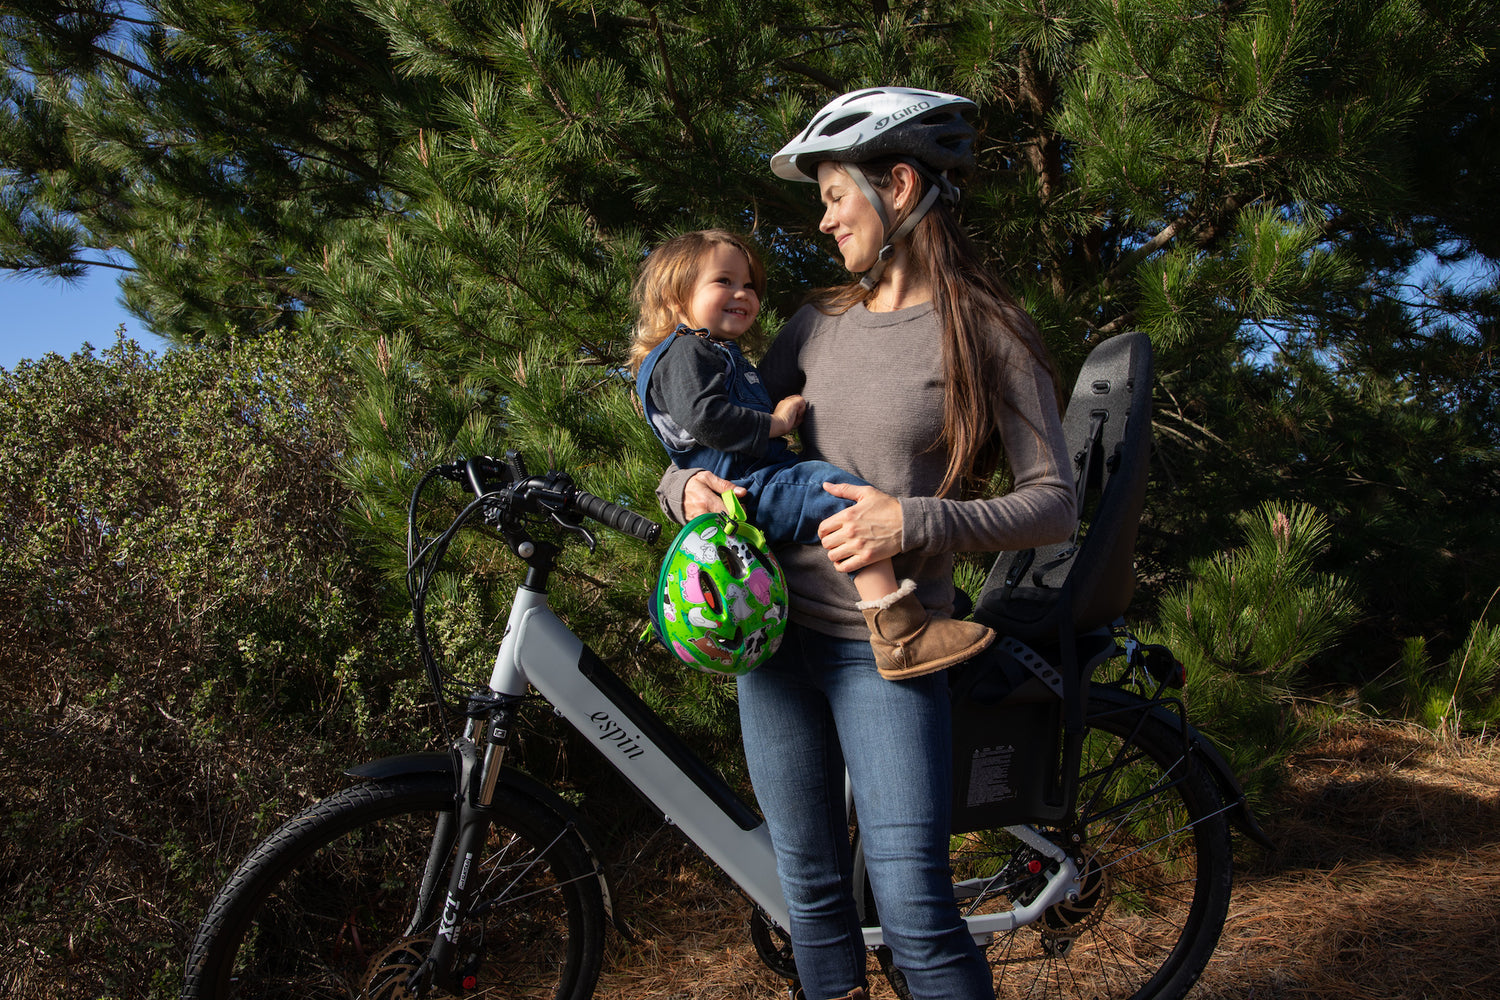 The Most Important Safety Gear for Riding an E-Bike